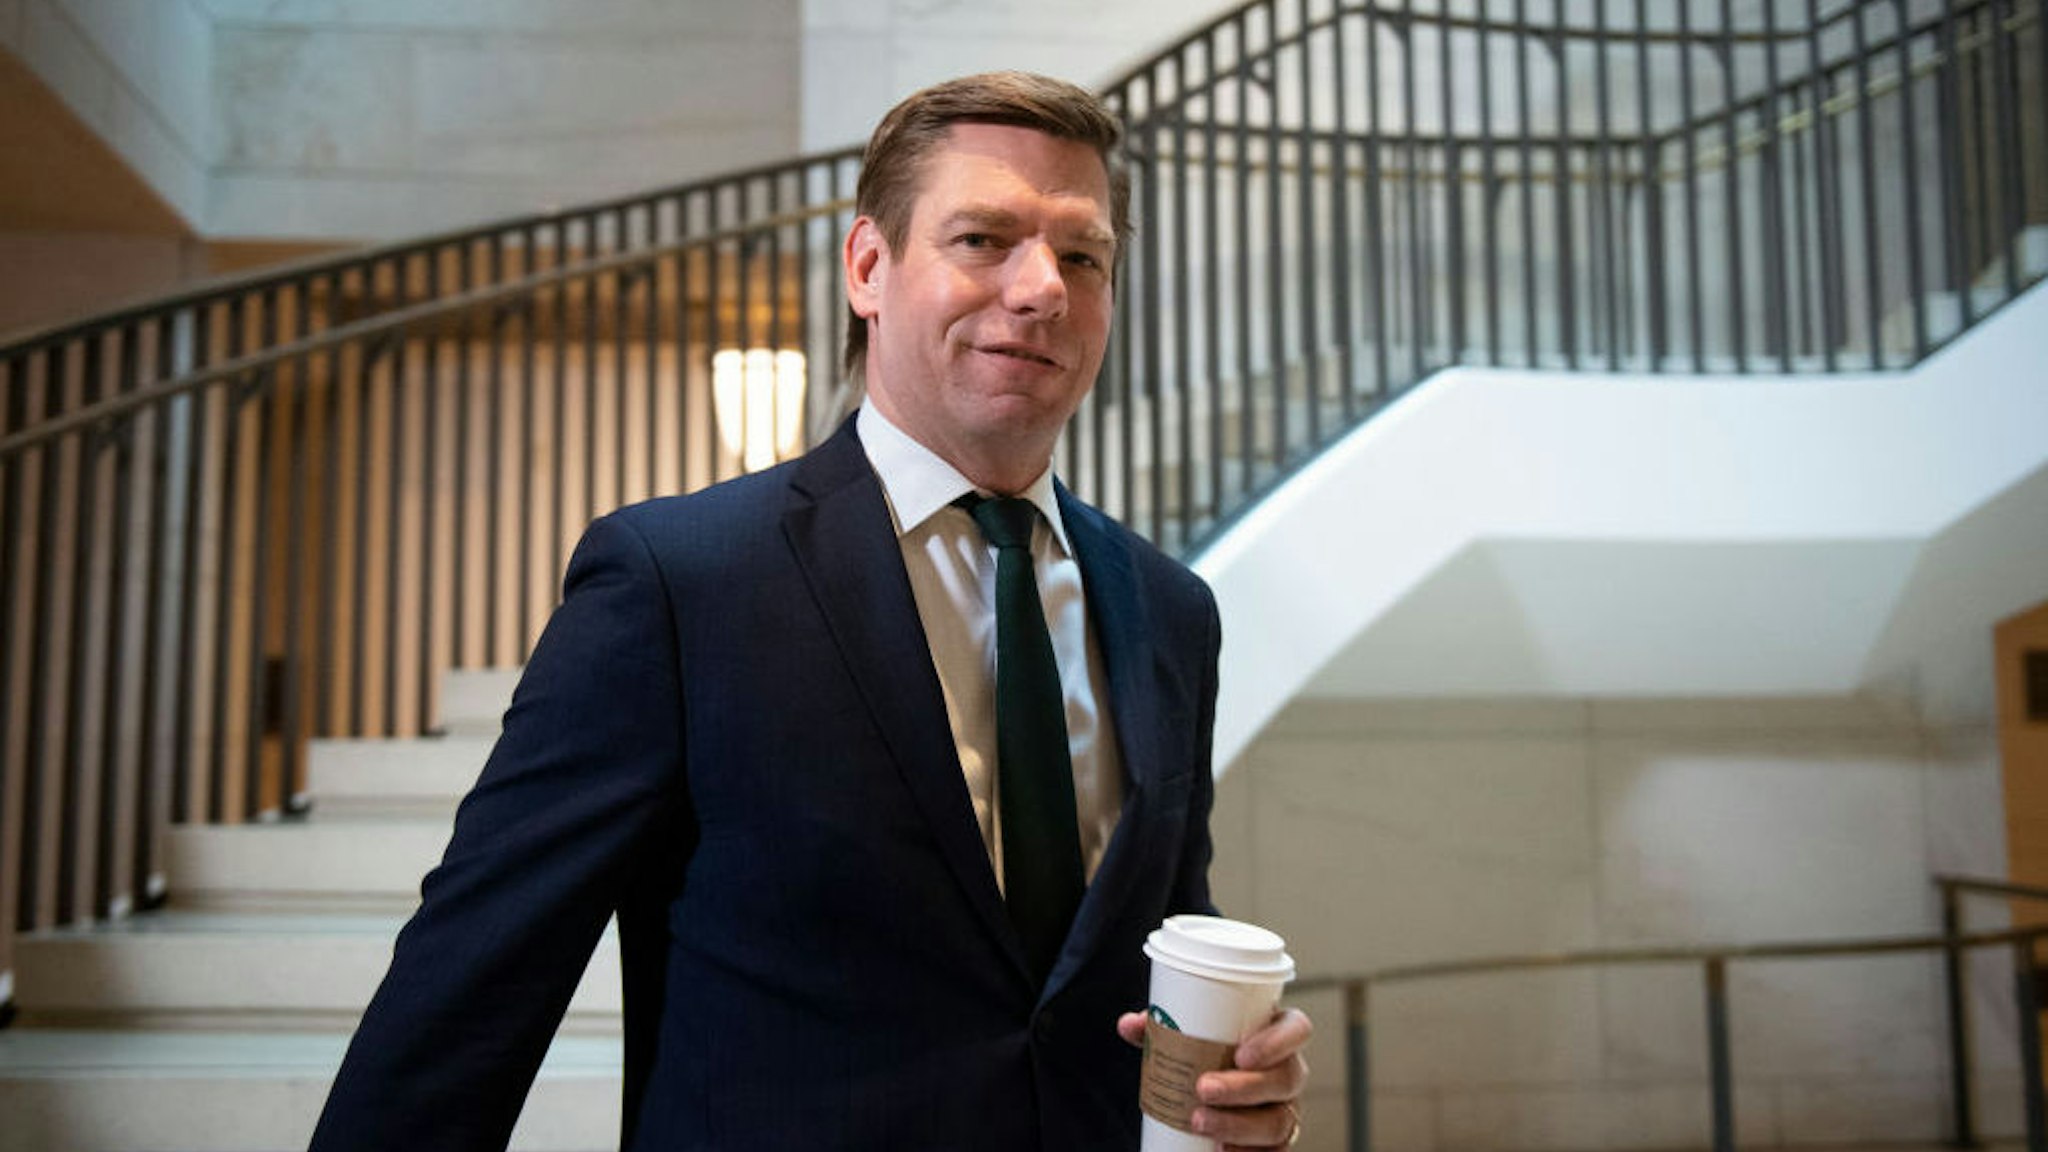 Rep. Eric Swalwell, D-Calif., arrives for the deposition of US Ambassador to the European Union Gordon Sondland at the Capitol in Washington on Thursday, Oct. 17, 2019. (Photo by Caroline Brehman/CQ-Roll Call, Inc via Getty Images)